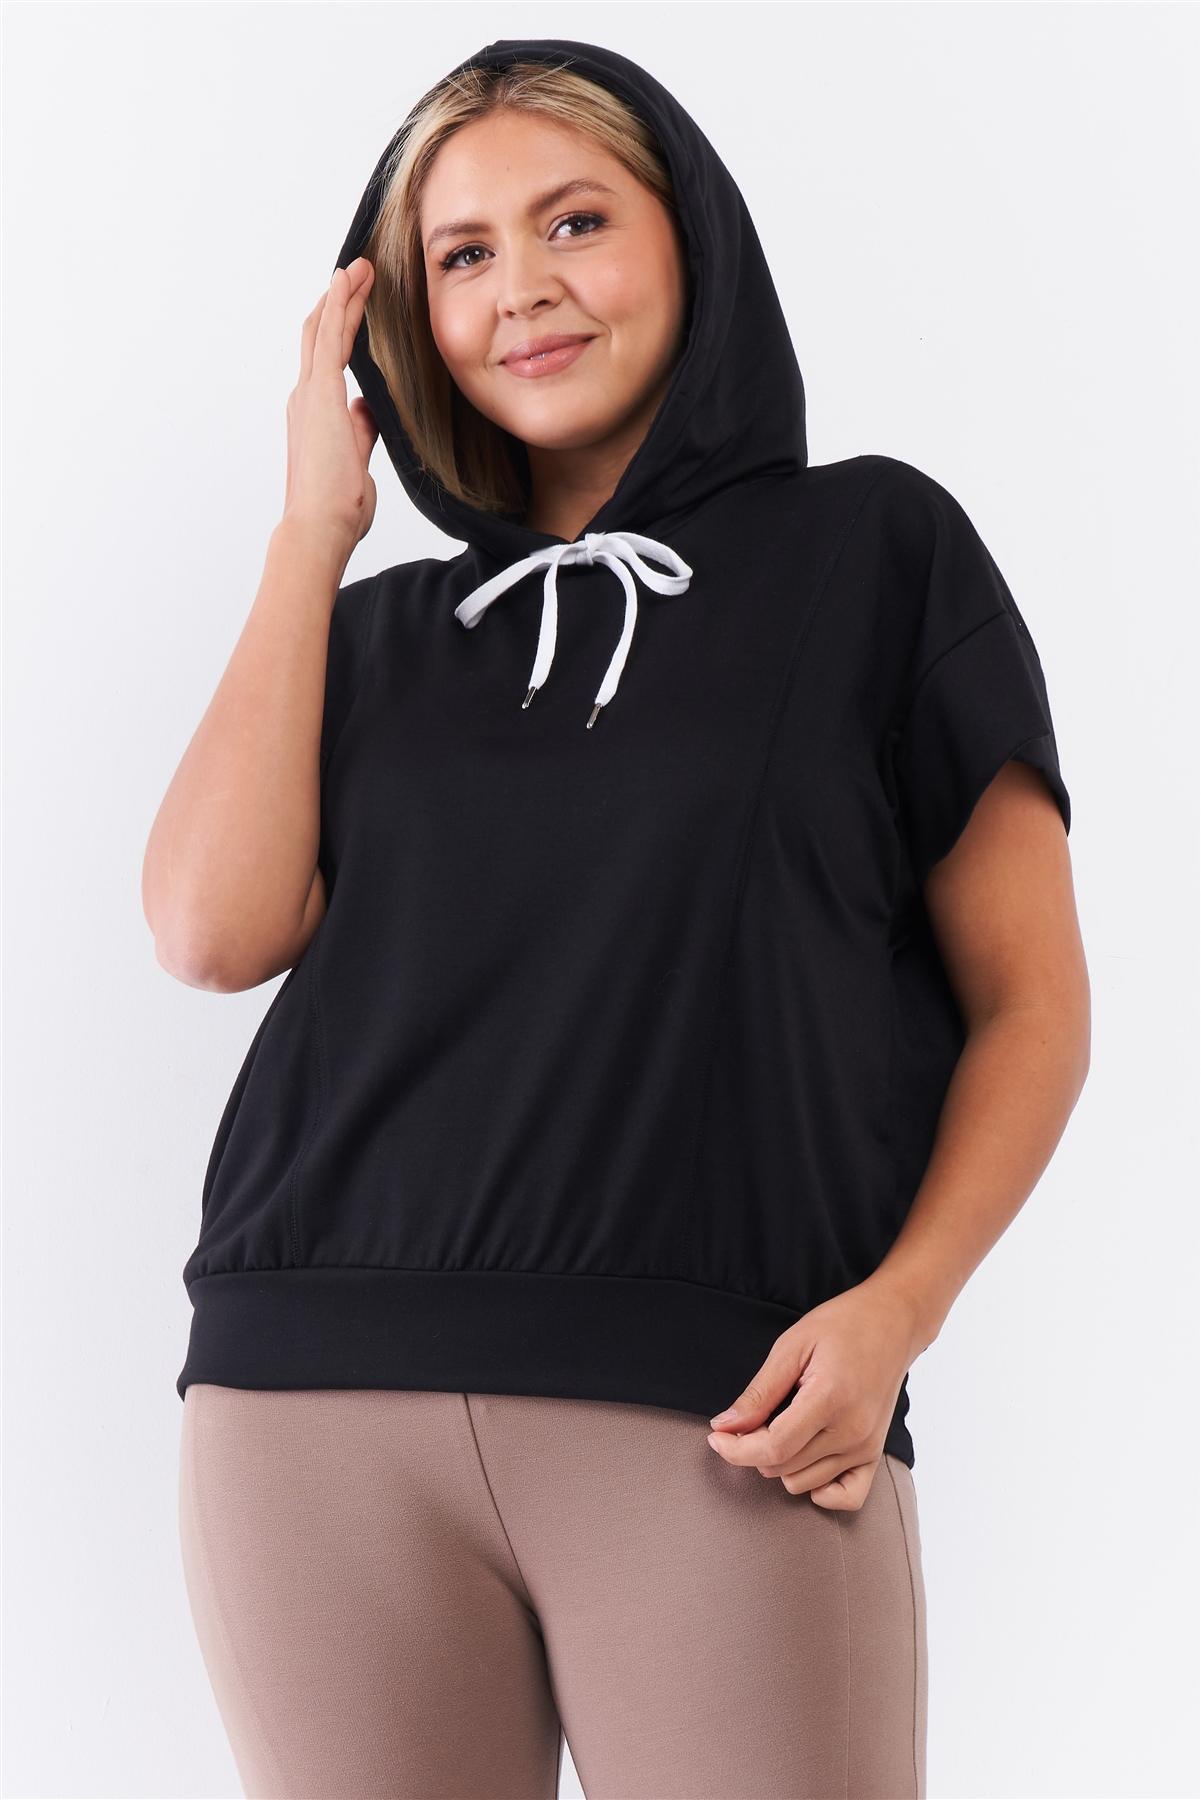 Black Short Wing Sleeve Relaxed Fit White Draw String Tie Hood Detail Top | us.meeeshop